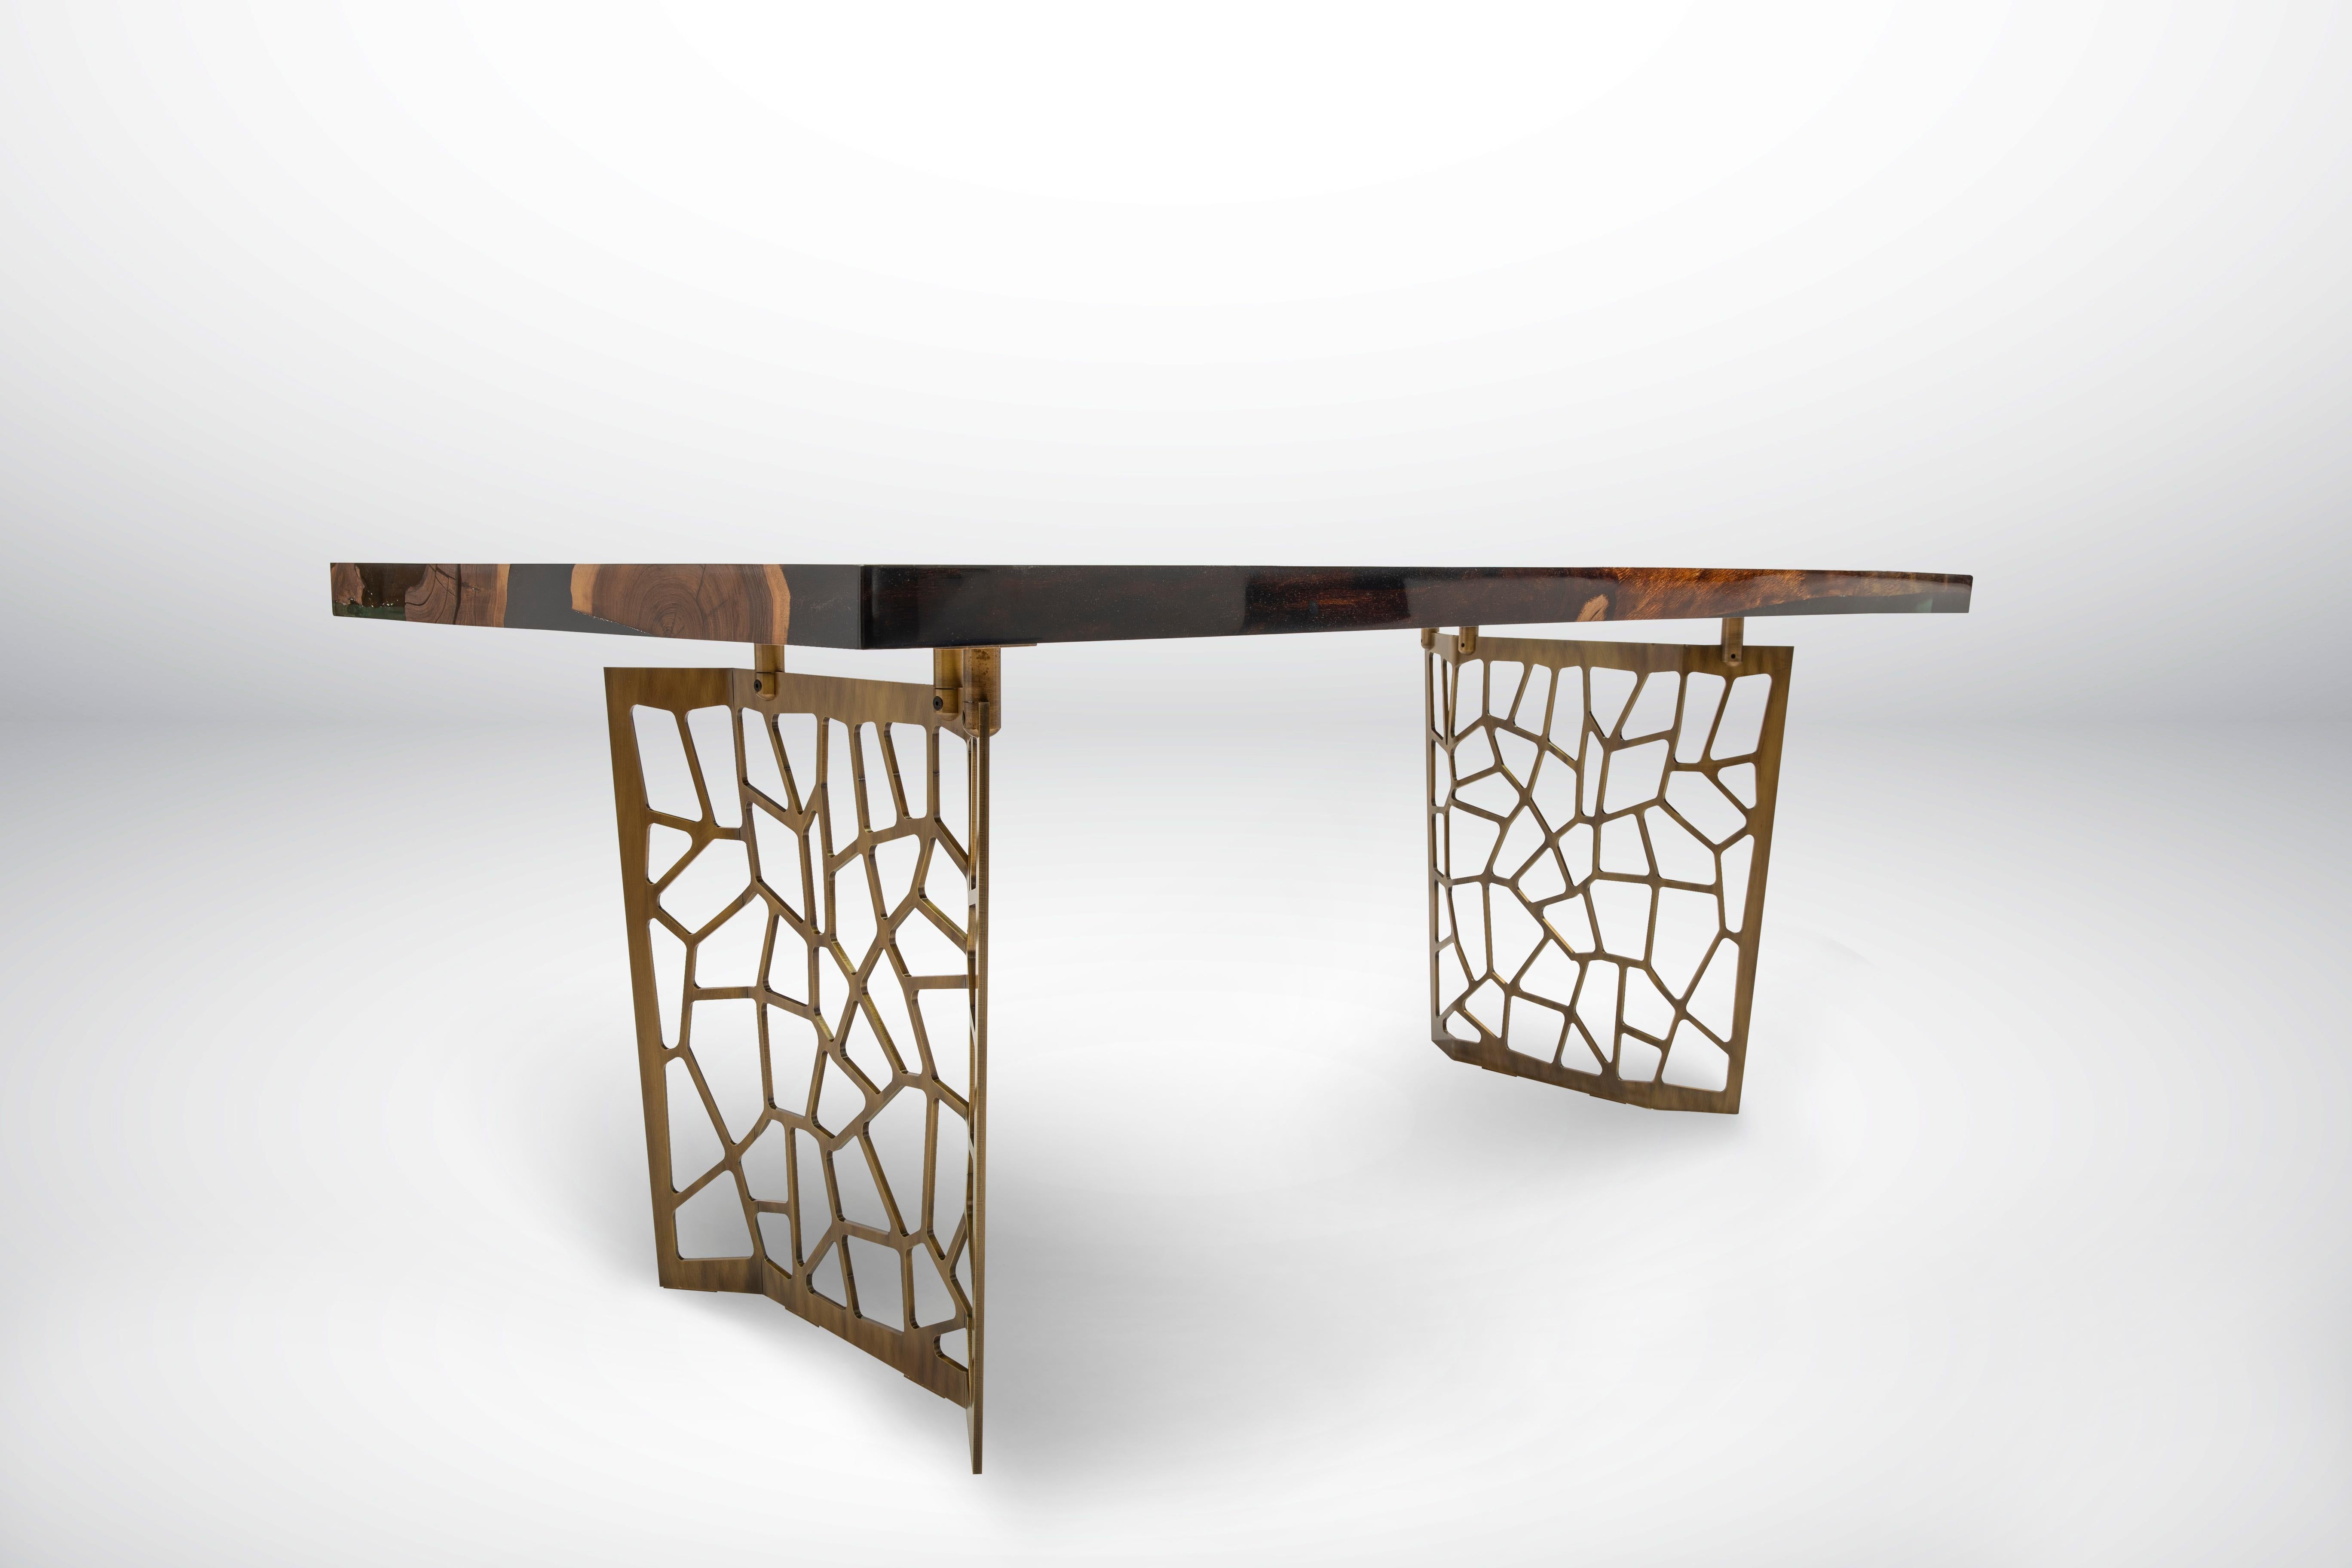 The Primitive 180 dining table integrates the finest wood from responsibly managed forests in Turkey with Naturalist’s perfected resin-pouring technique. This fusion of natural elements with modern materials is at the heart of Naturalist’s work, and